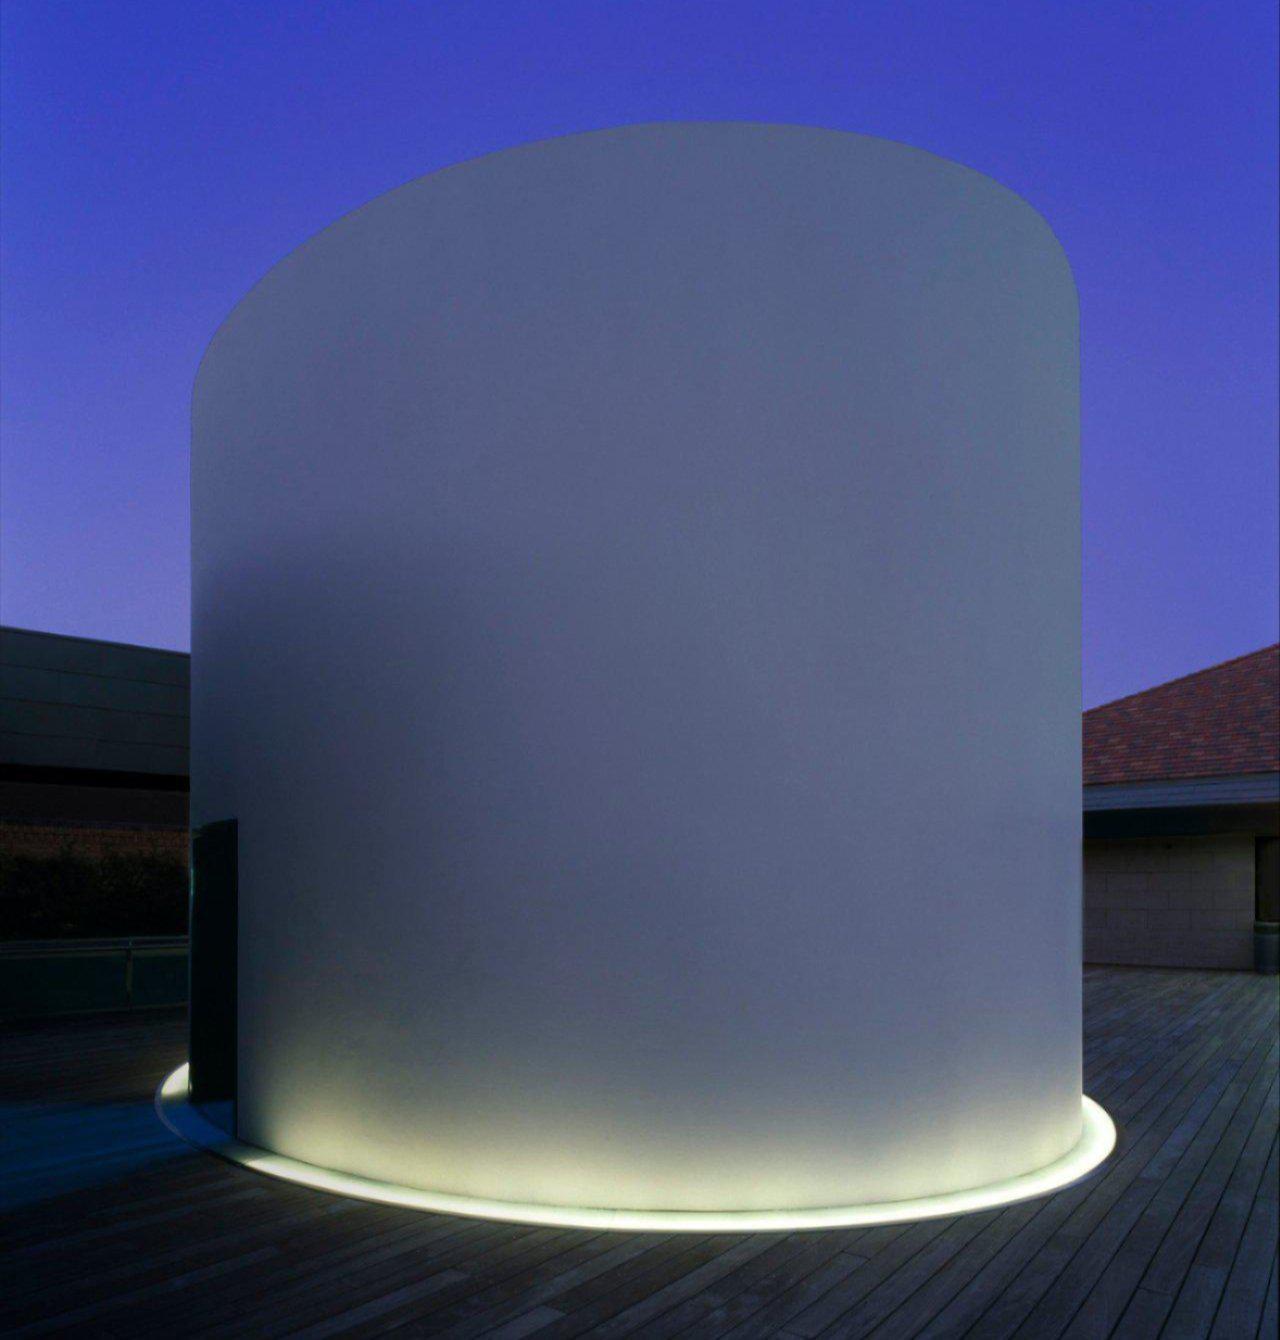 A photo of James Turrell's "The Color Inside" at night